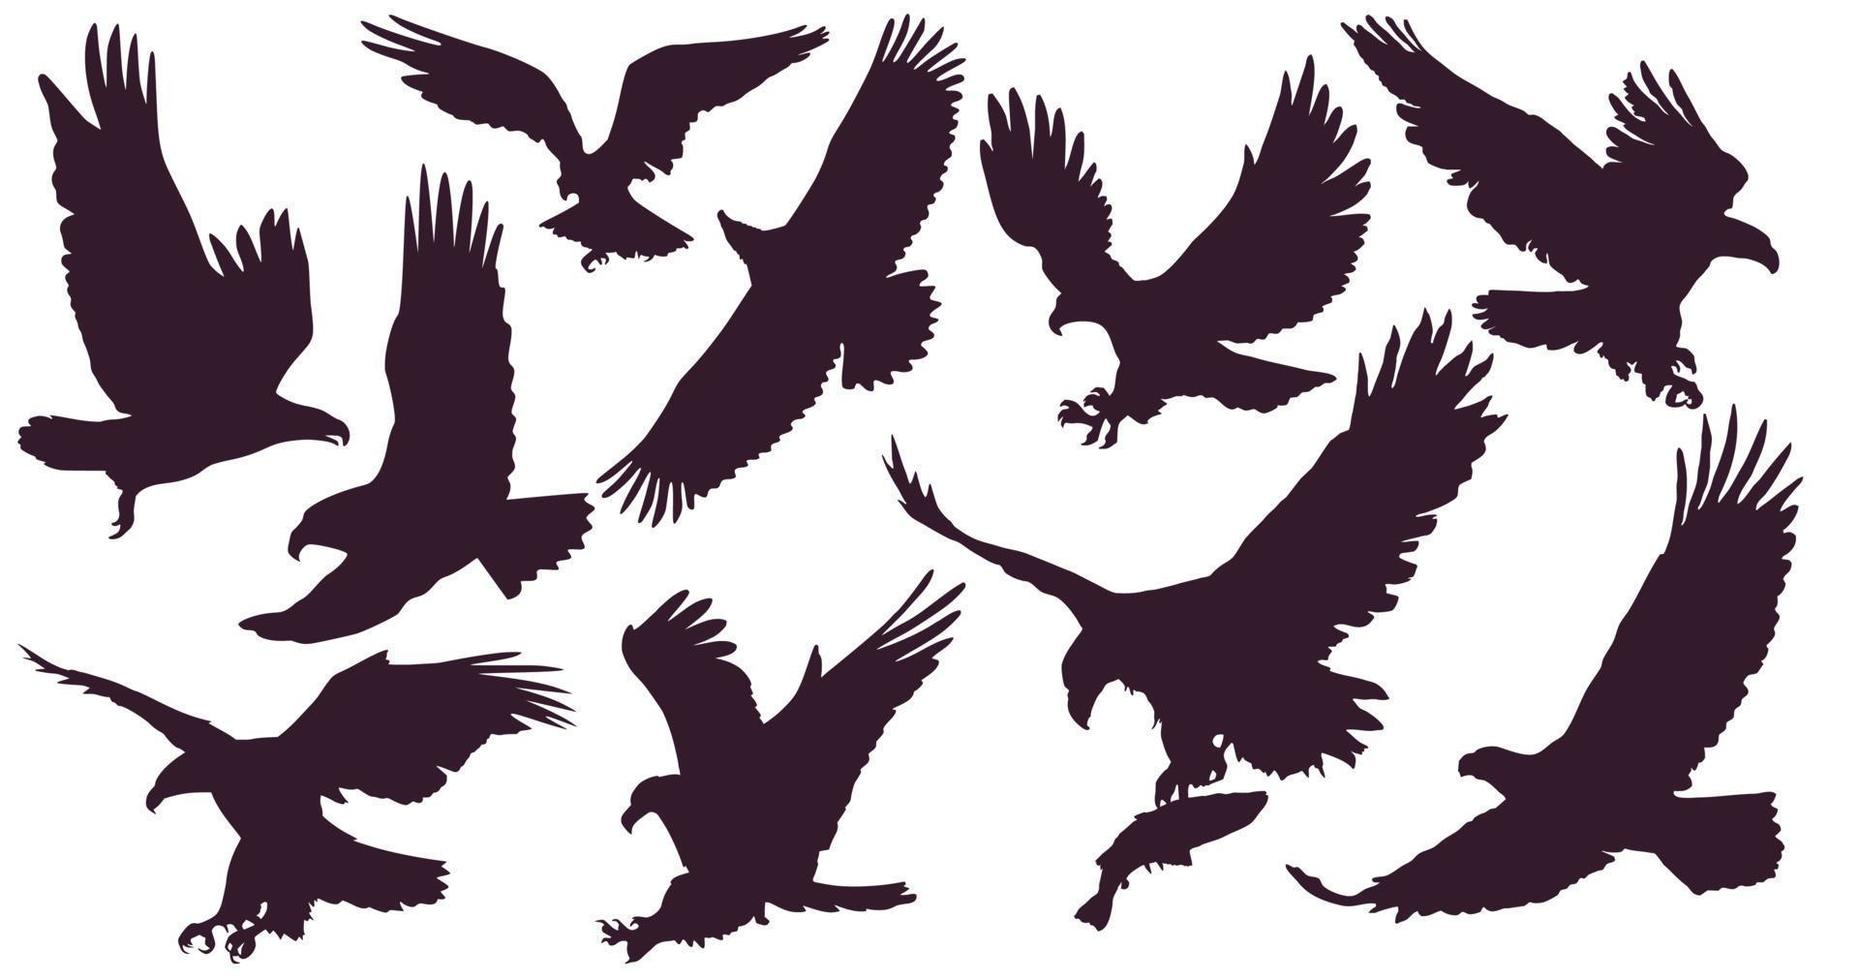 Eagles. Bird king set. 10 silhouettes of eagles. An attacking eagle flying in the sky with a large wingspan. vector